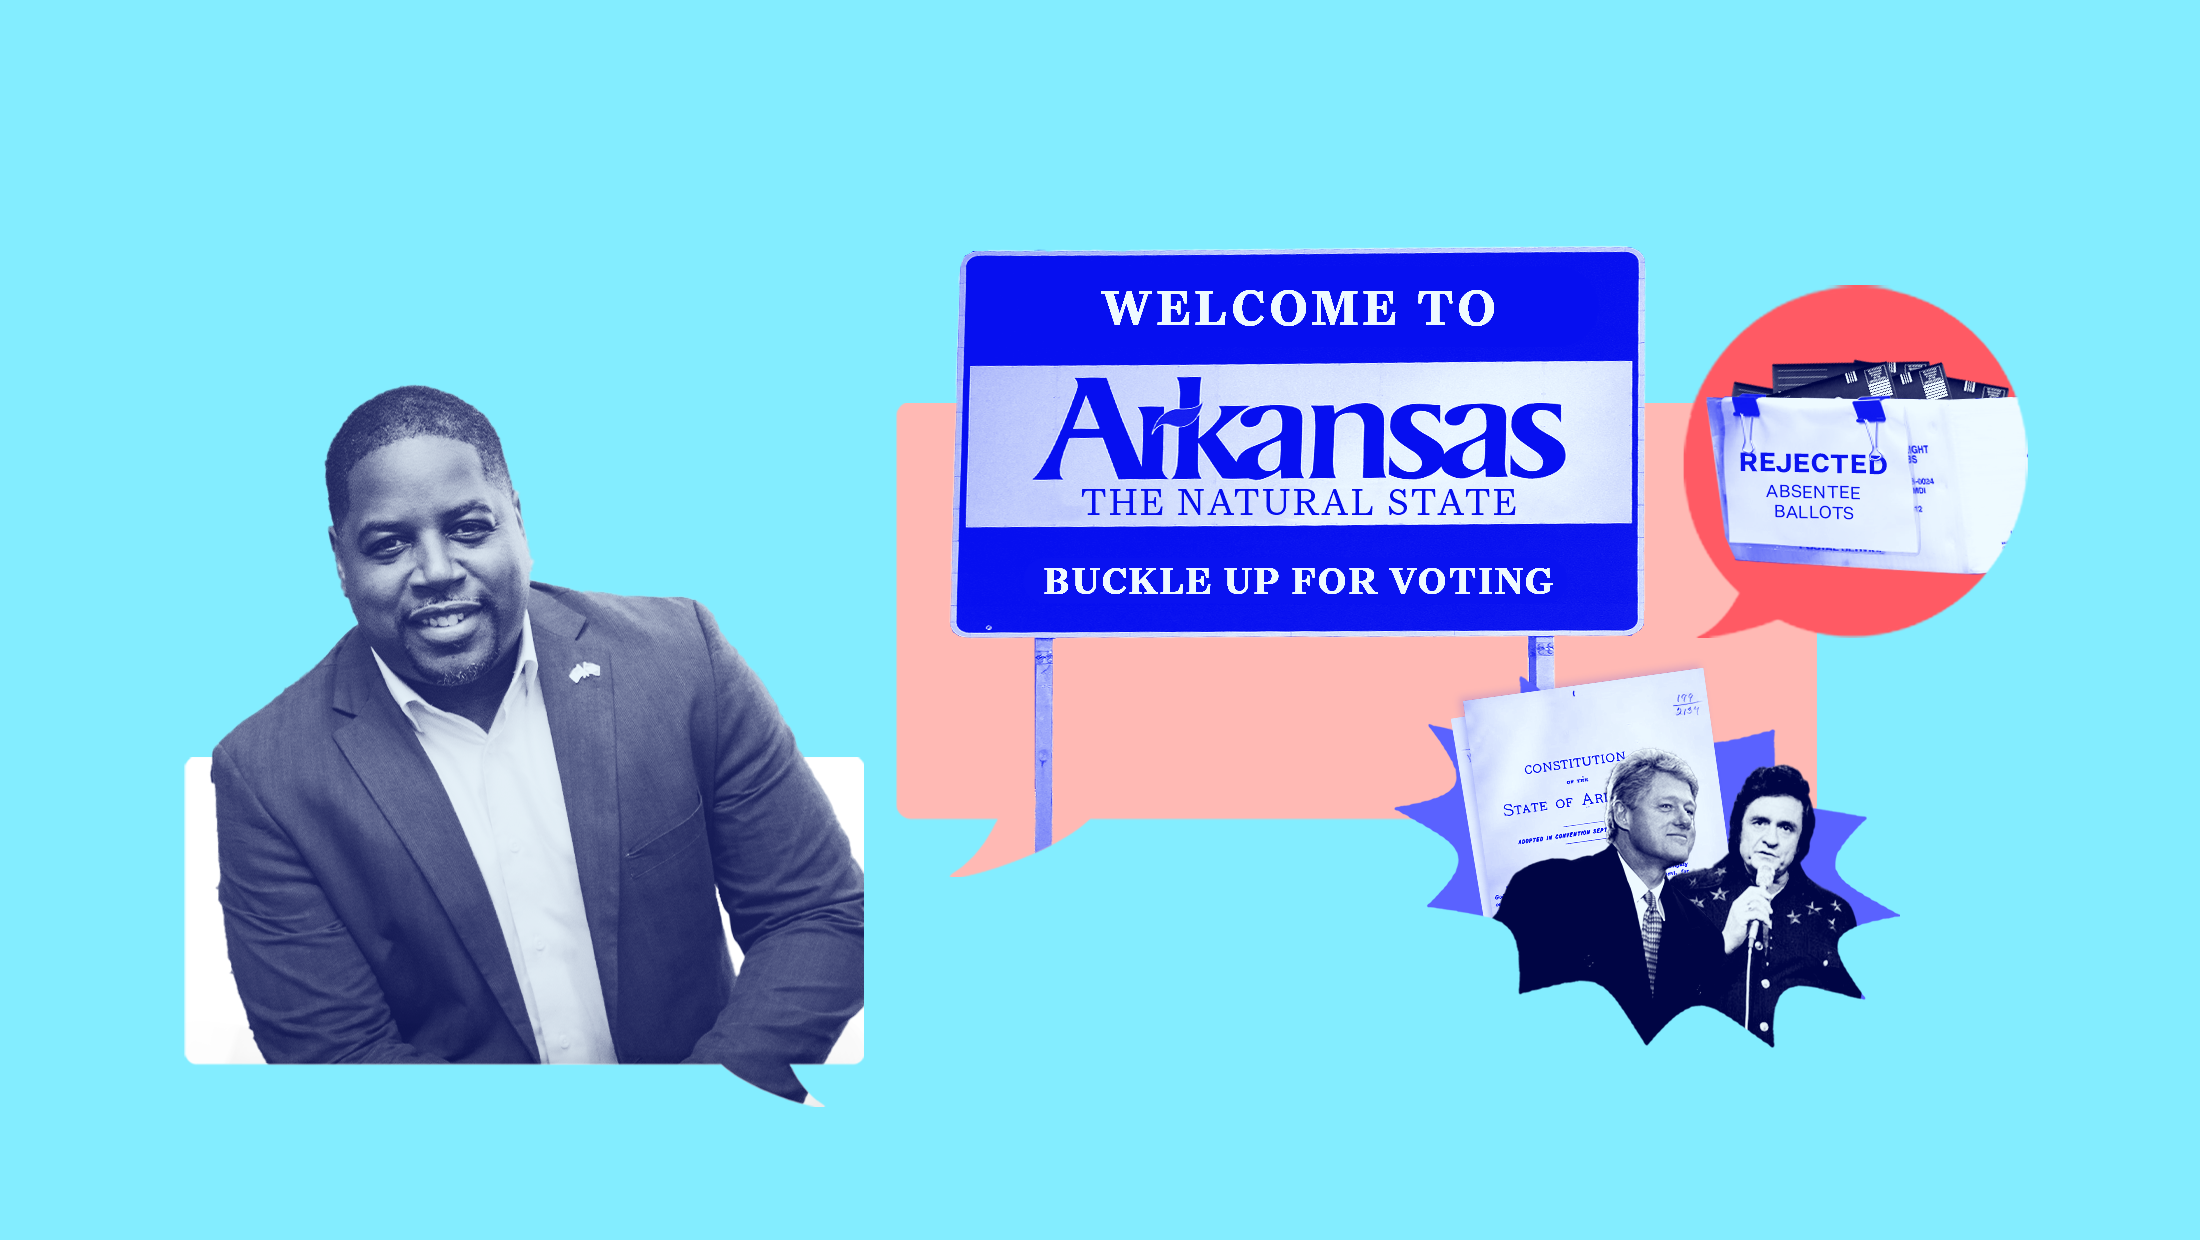 Light blue background with blue-toned image of Arkansas gubernatorial candidate Chris Jones, a blue sign that reads "WELCOME TO ARKANSAS THE NATURAL STATE BUCKLE UP FOR VOTING," a white box labeled "REJECTED ABSENTEE BALLOTS," the Arkansas Constitution behind dark blue-toned images of Bill Clinton and Johnny Cash.